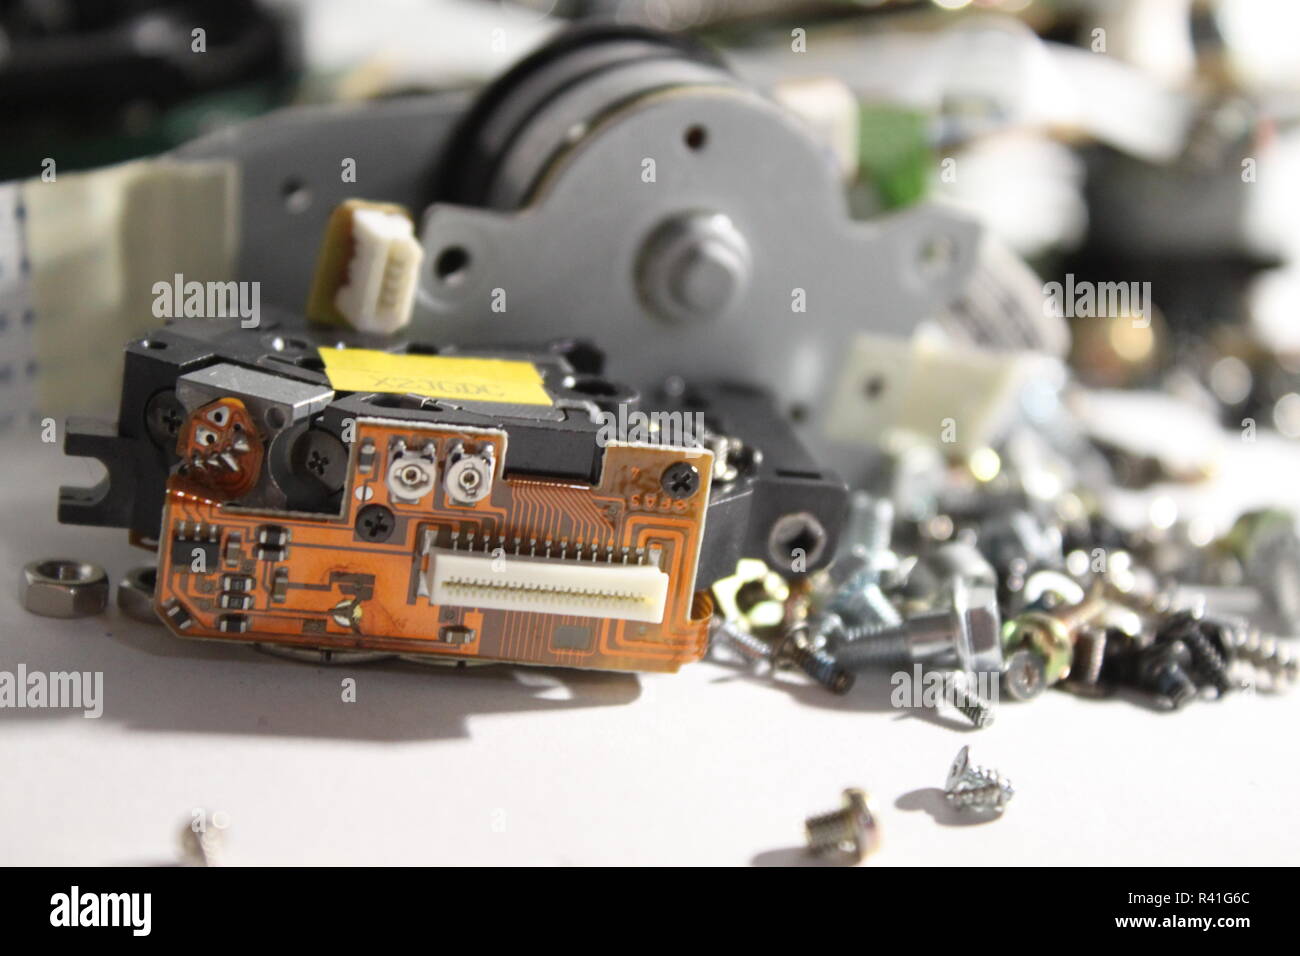 A pile of broken technology parts. Stock Photo